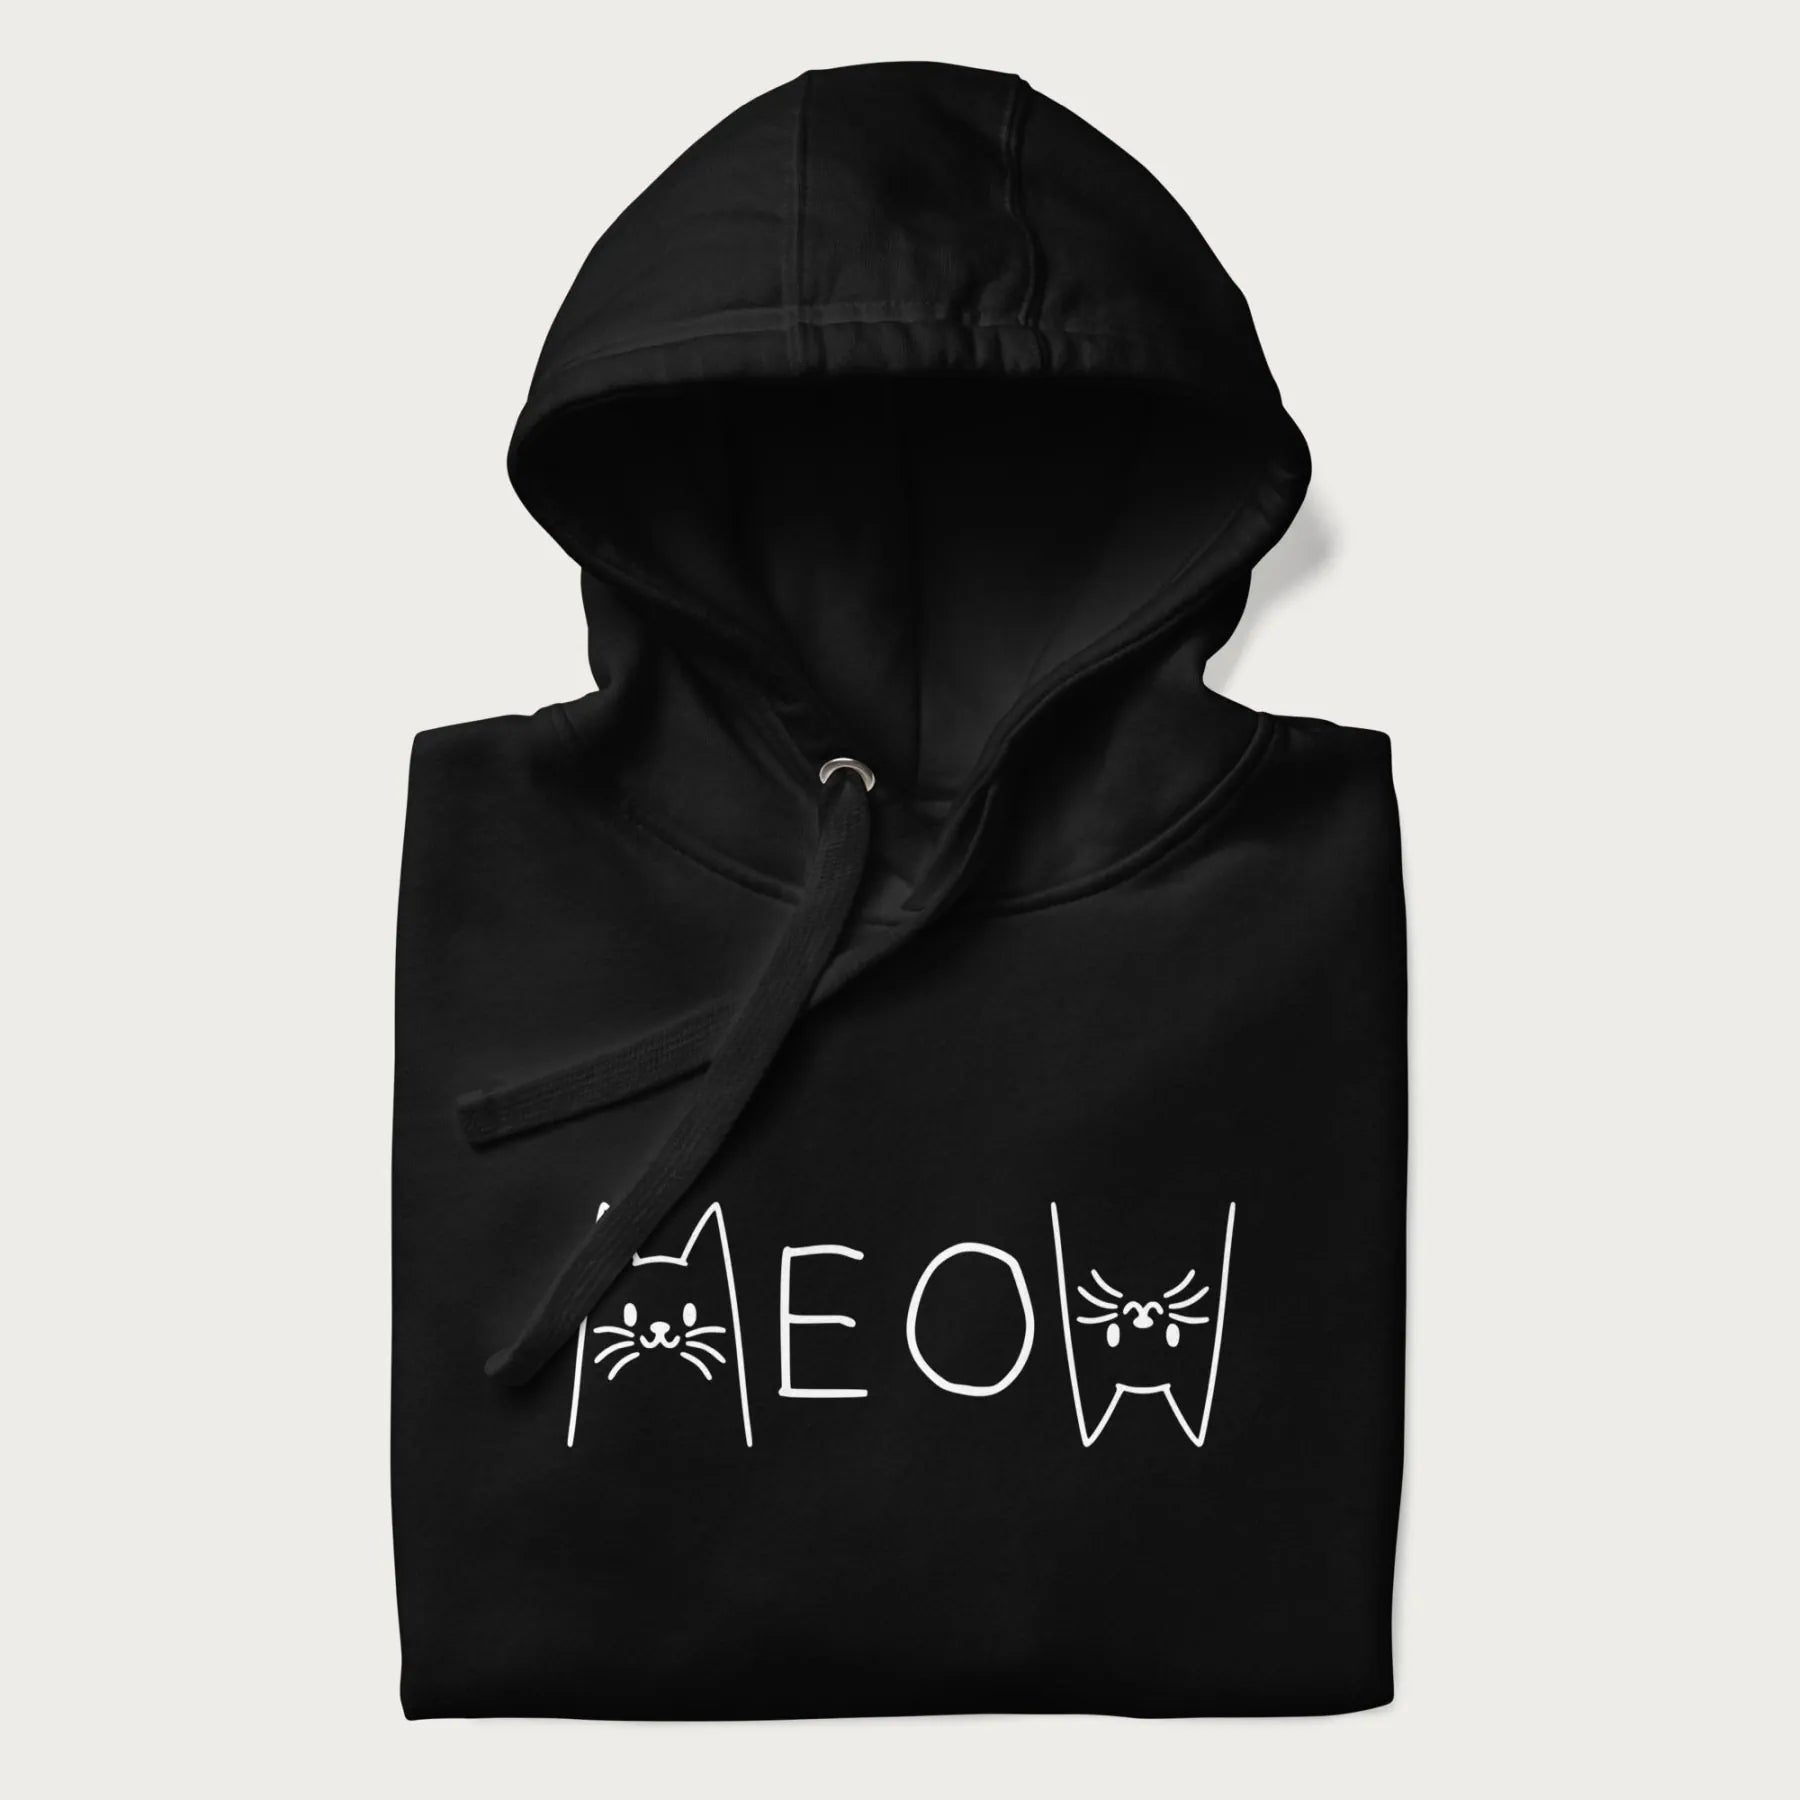 Folded black meow hoodie with a simple 'MEOW' text and cute cat face graphics on the front.